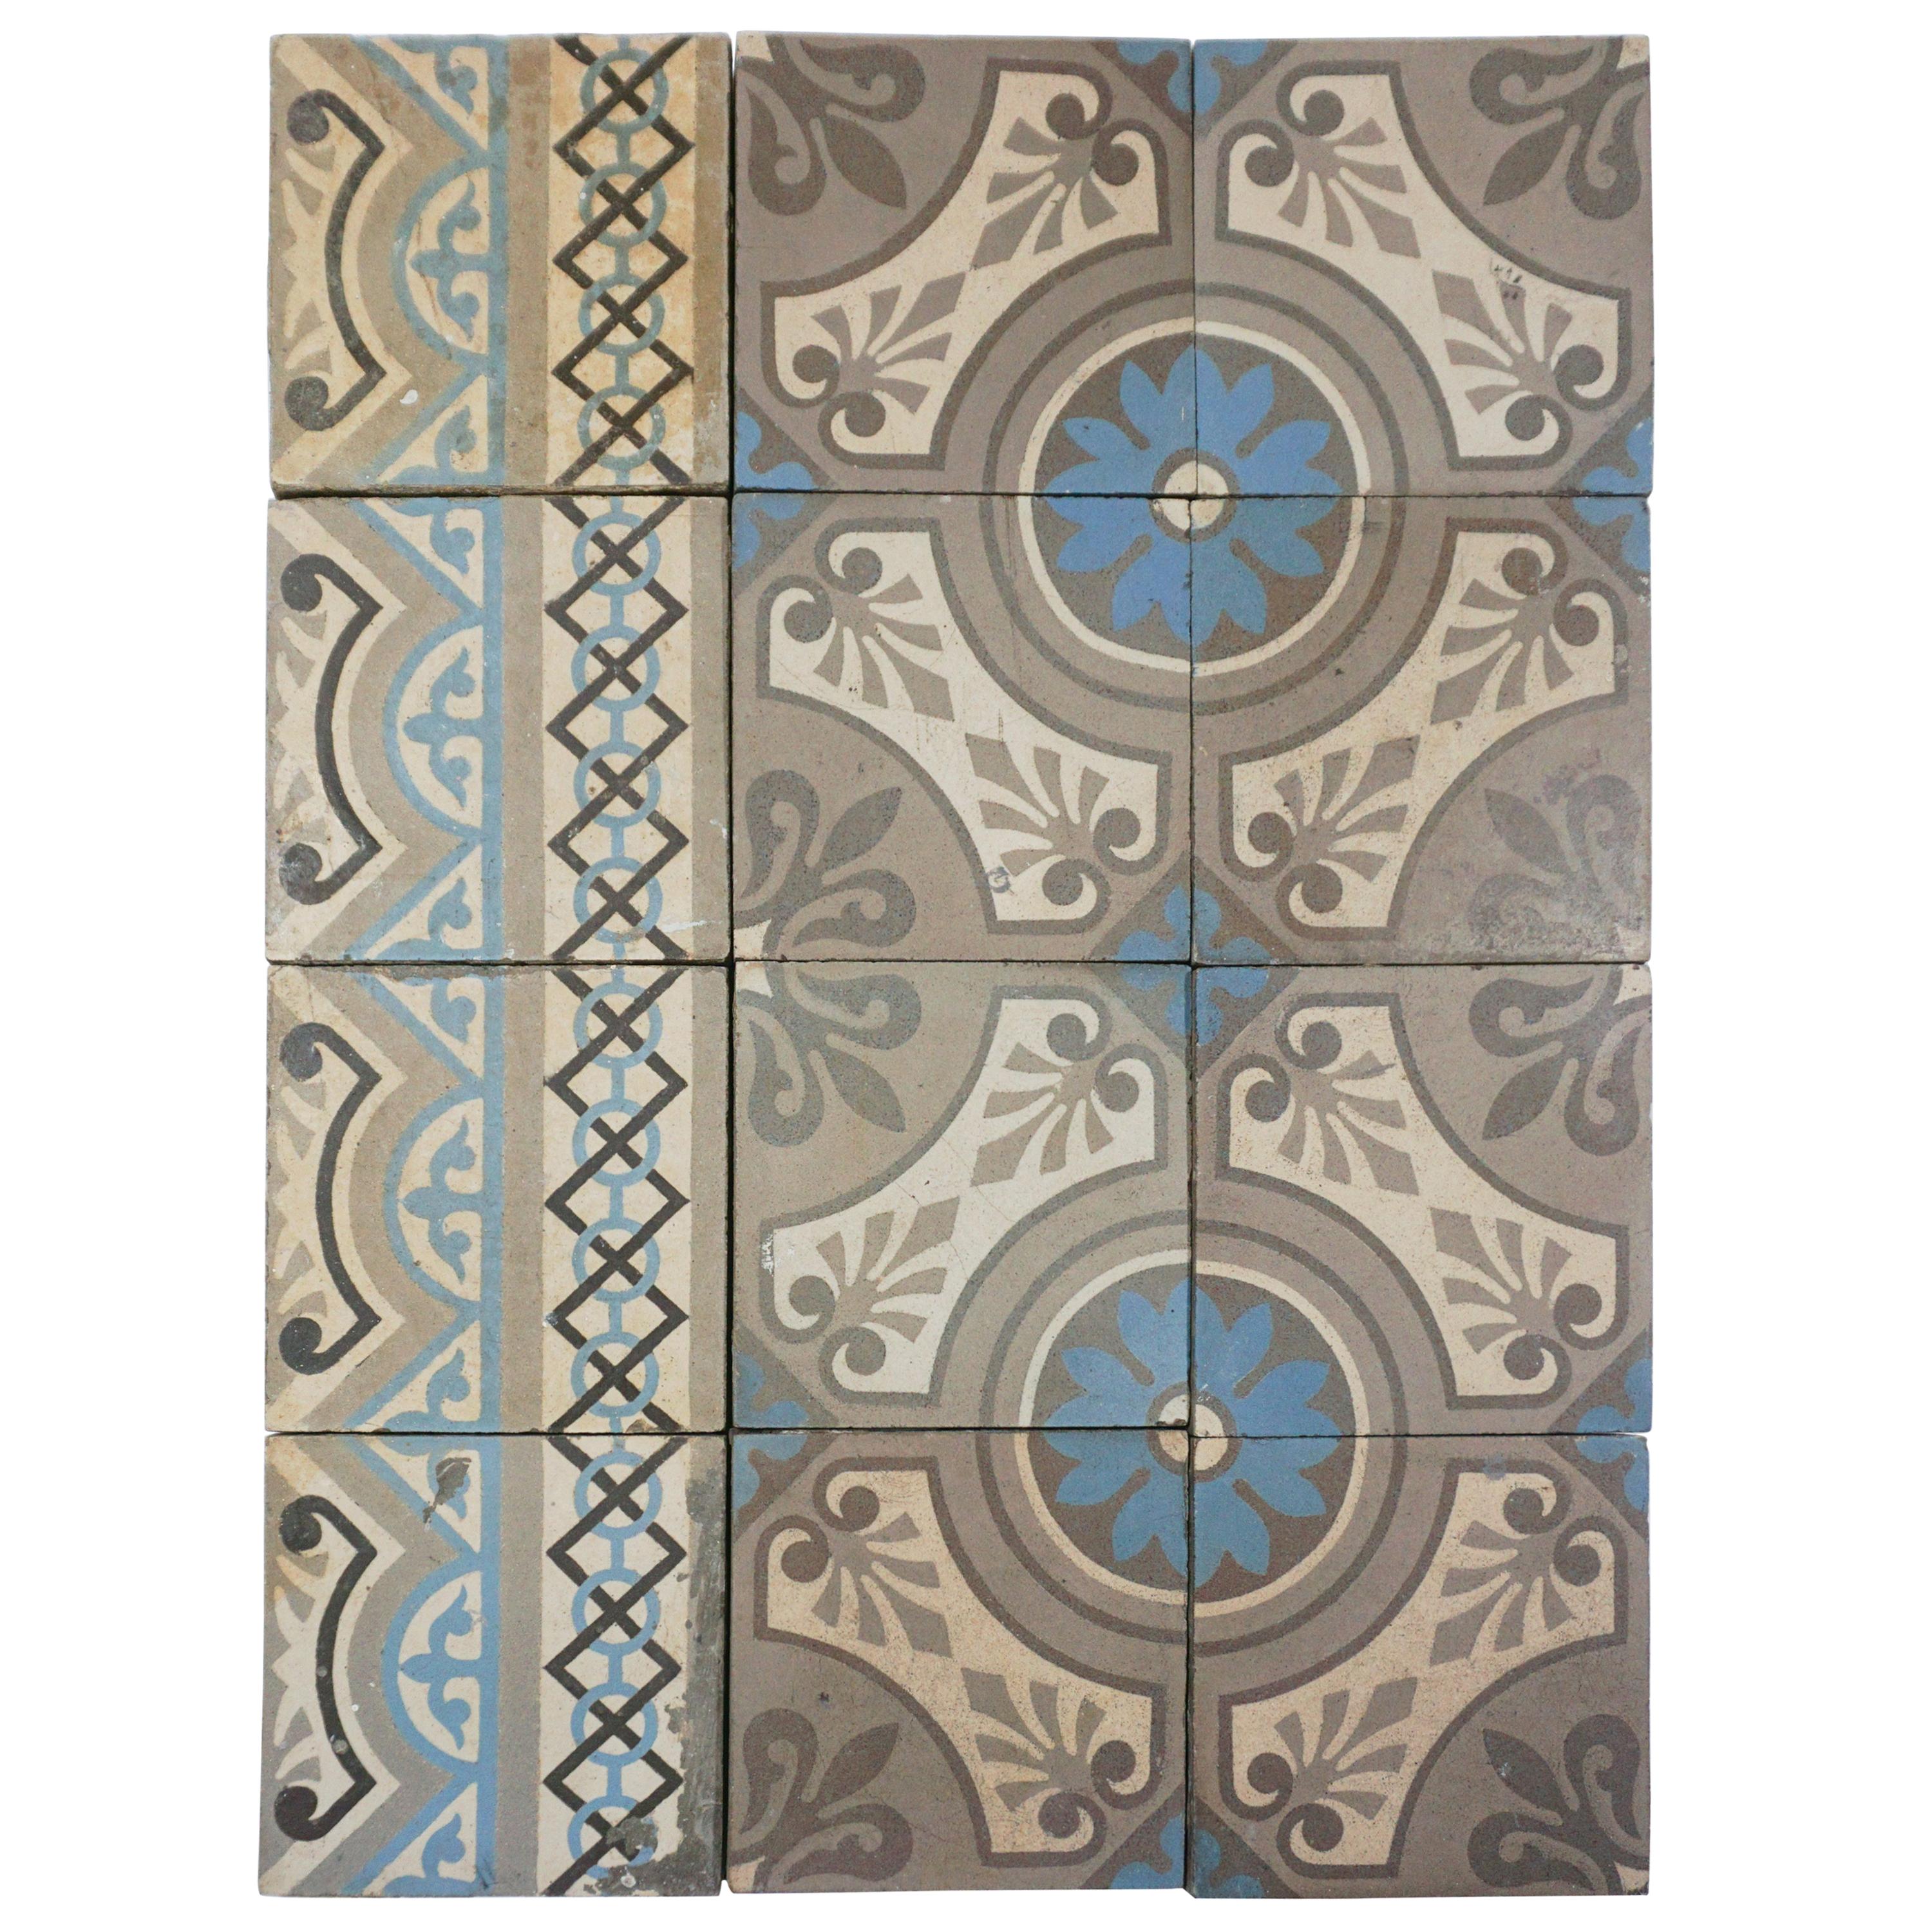 Reclaimed French Tiles, circa 1900